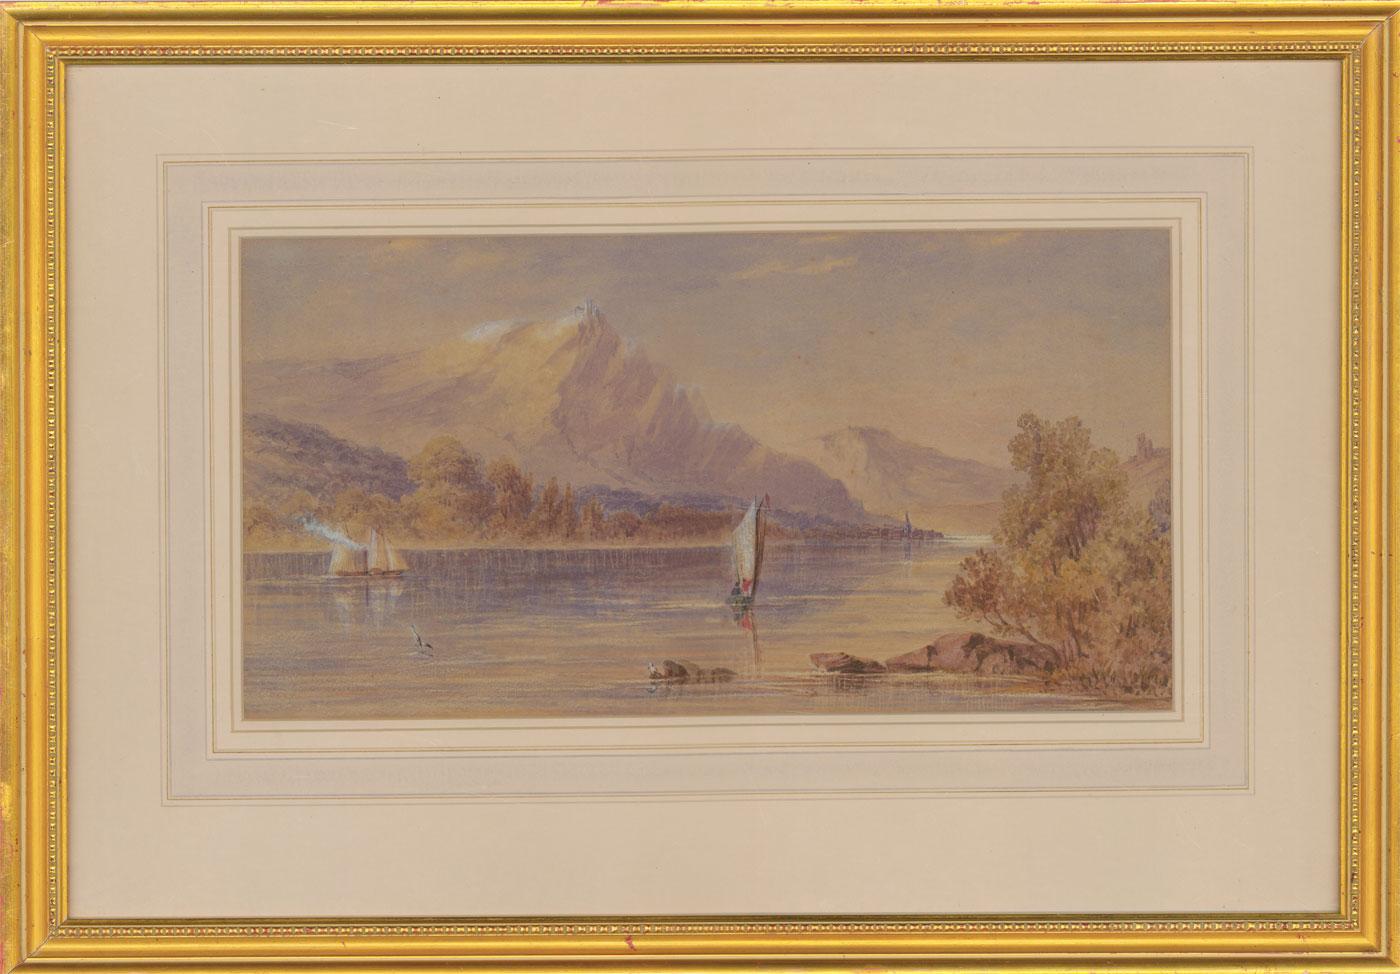 A charming early 20th Century watercolour with gouache highlights by the artist John Charles Moody (1884-1962), depicting a tranquil mountain landscape with a lake, castle ruins in the distance and boats sailing on the calm waters. Well presented in